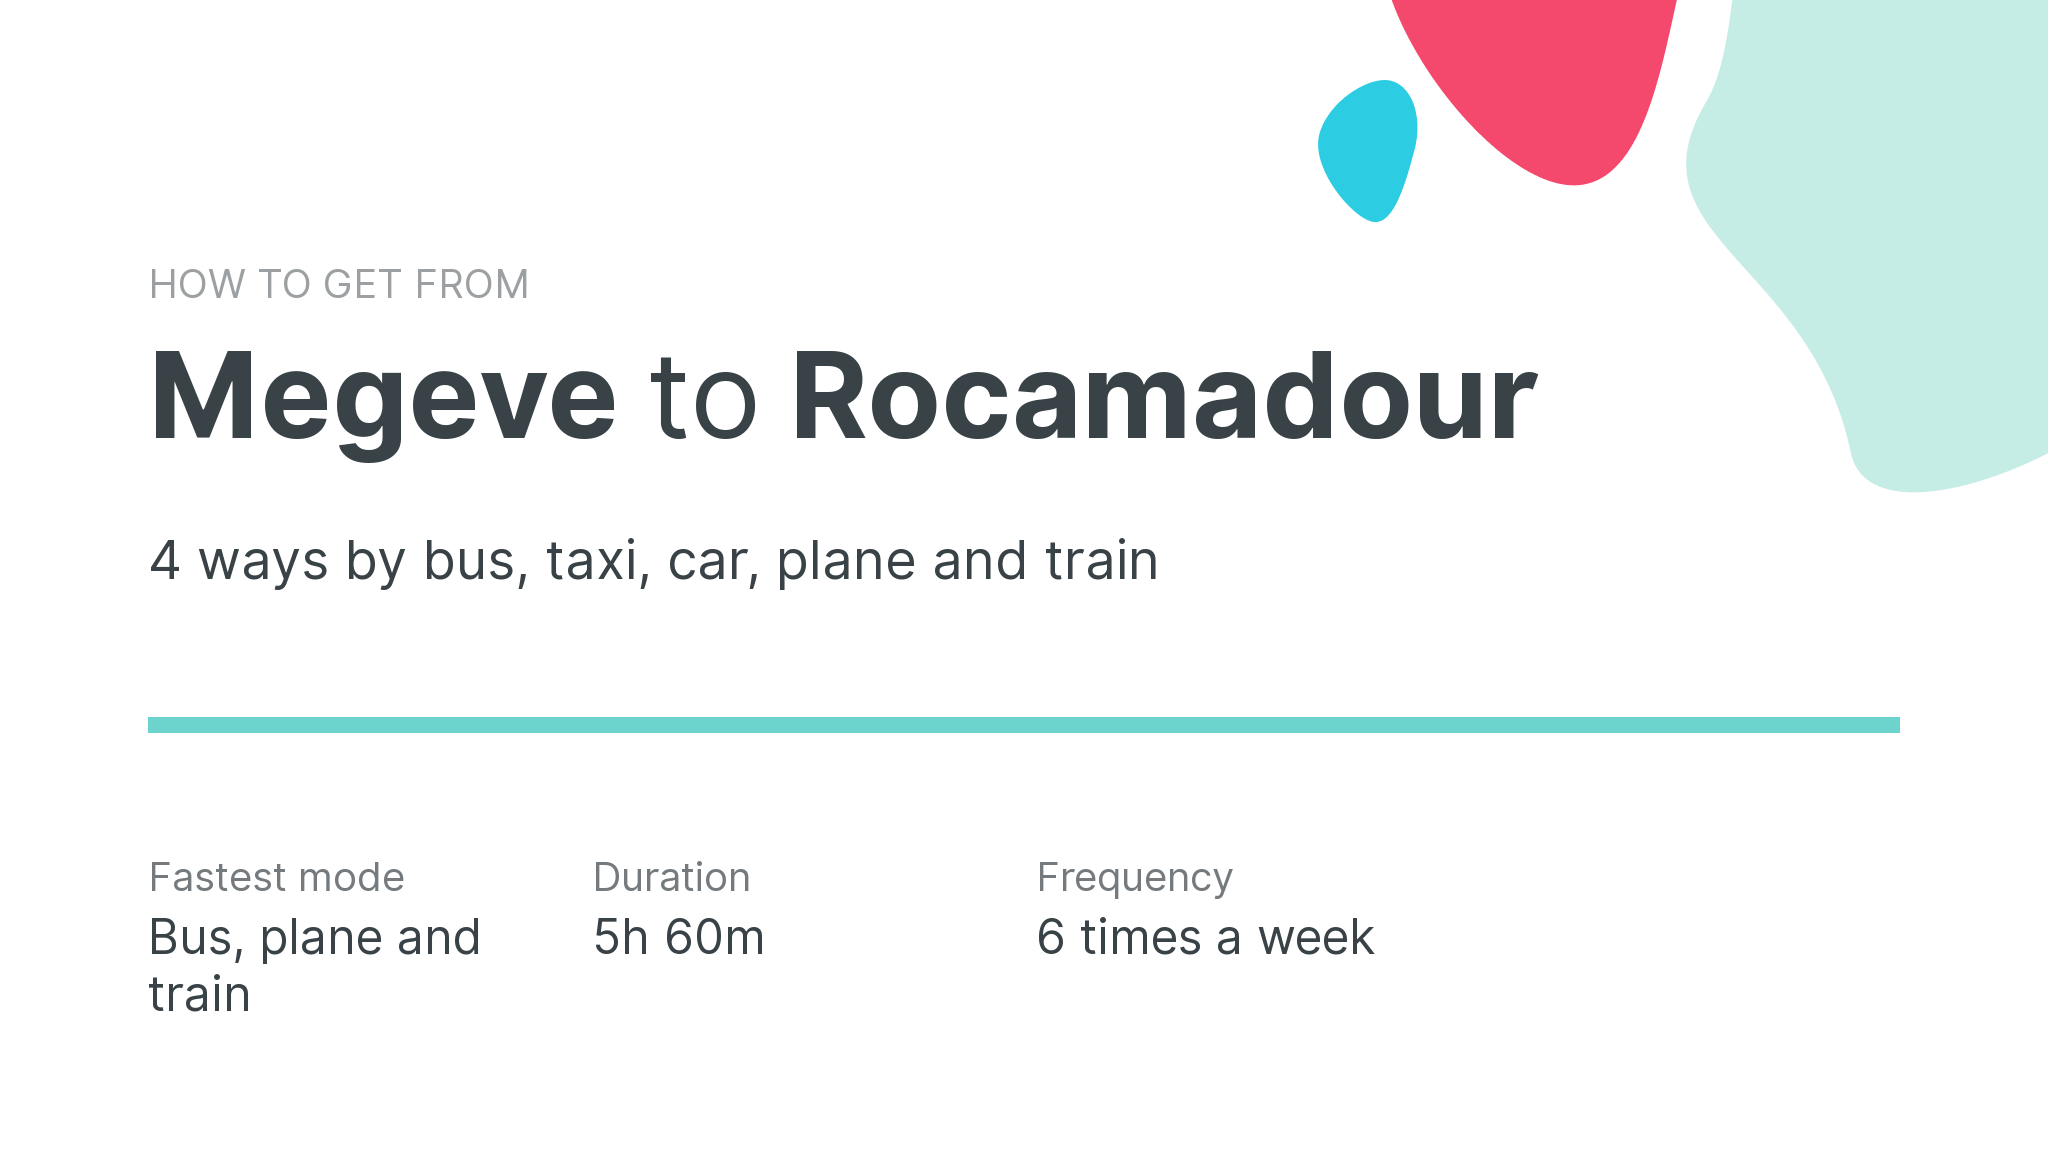 How do I get from Megeve to Rocamadour